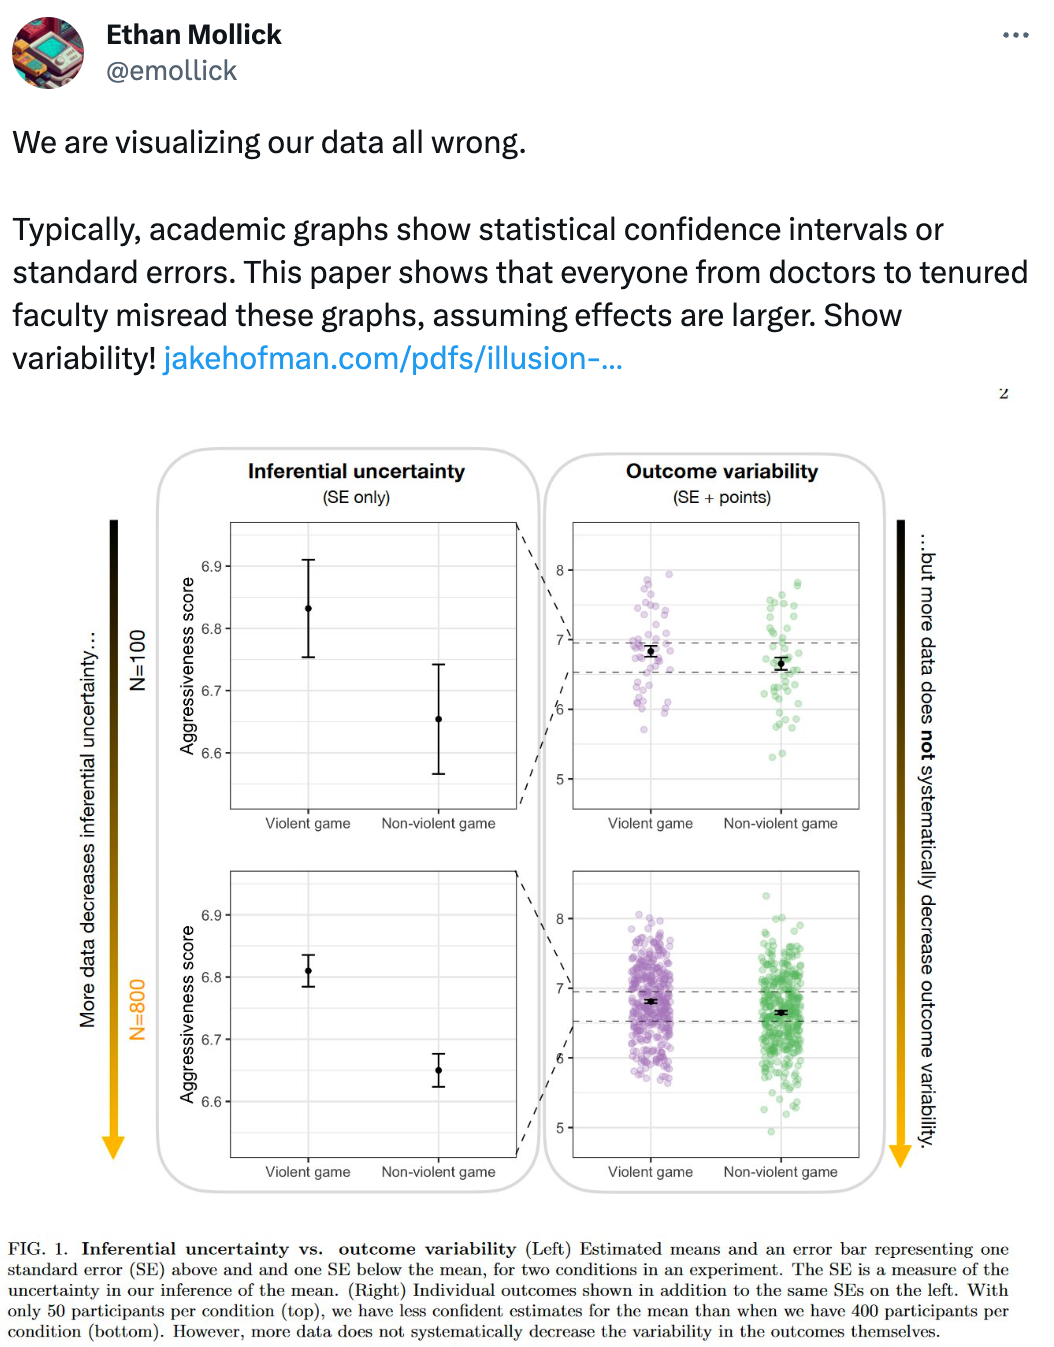  See new Tweets Conversation Ethan Mollick @emollick We are visualizing our data all wrong.  Typically, academic graphs show statistical confidence intervals or standard errors. This paper shows that everyone from doctors to tenured faculty misread these graphs, assuming effects are larger. Show variability! http://jakehofman.com/pdfs/illusion-of-predictability.pdf